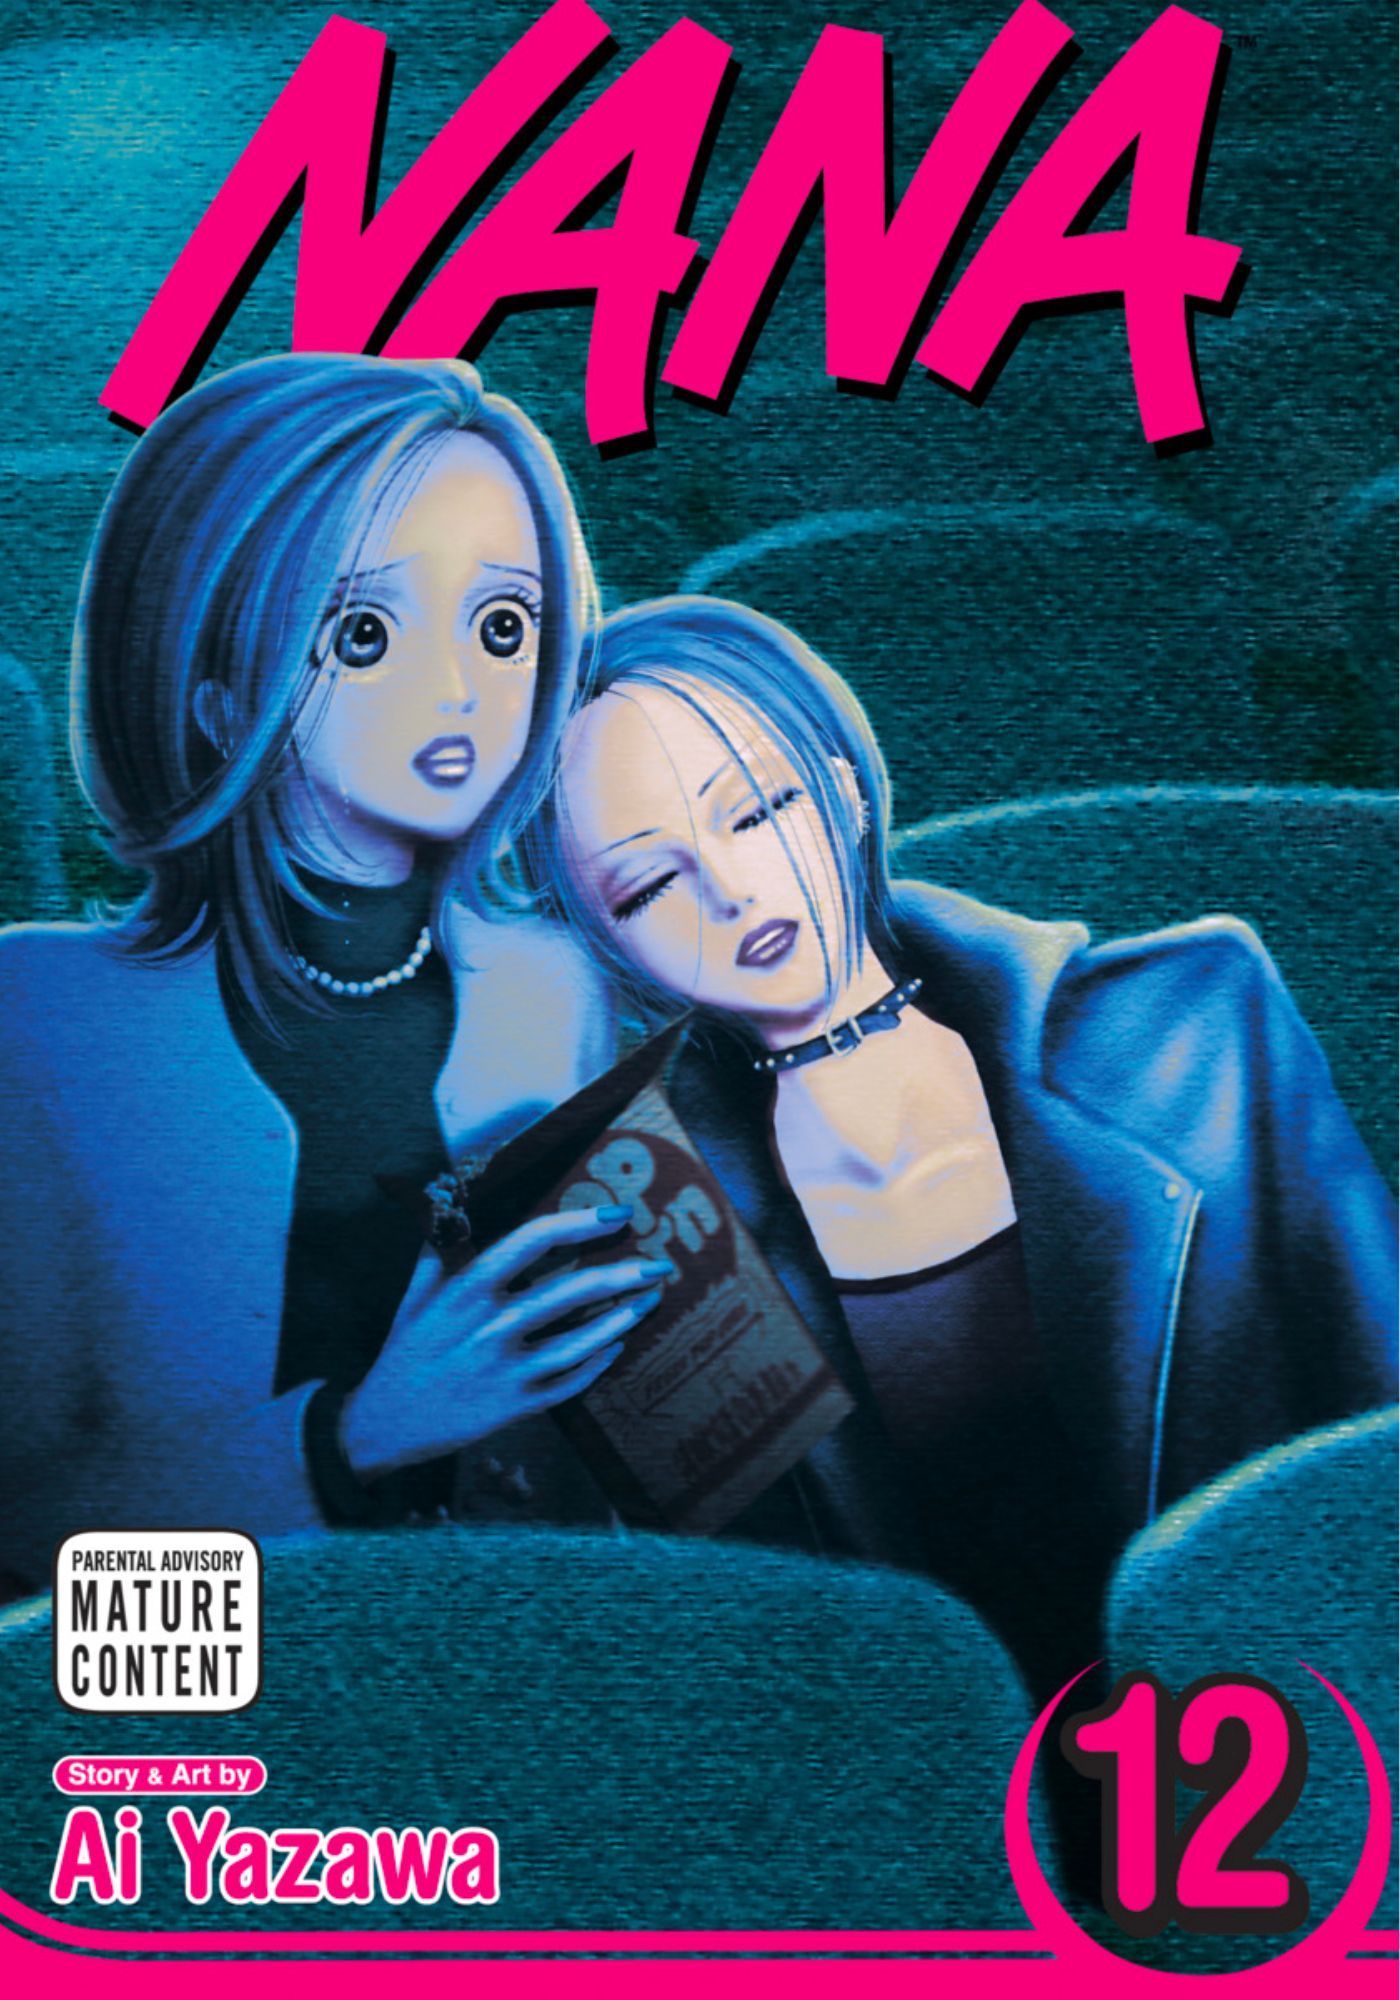 Nana volume 12 cover art of Nana and Hachi seeing a movie together, as Nana leans against Hachi and falls asleep